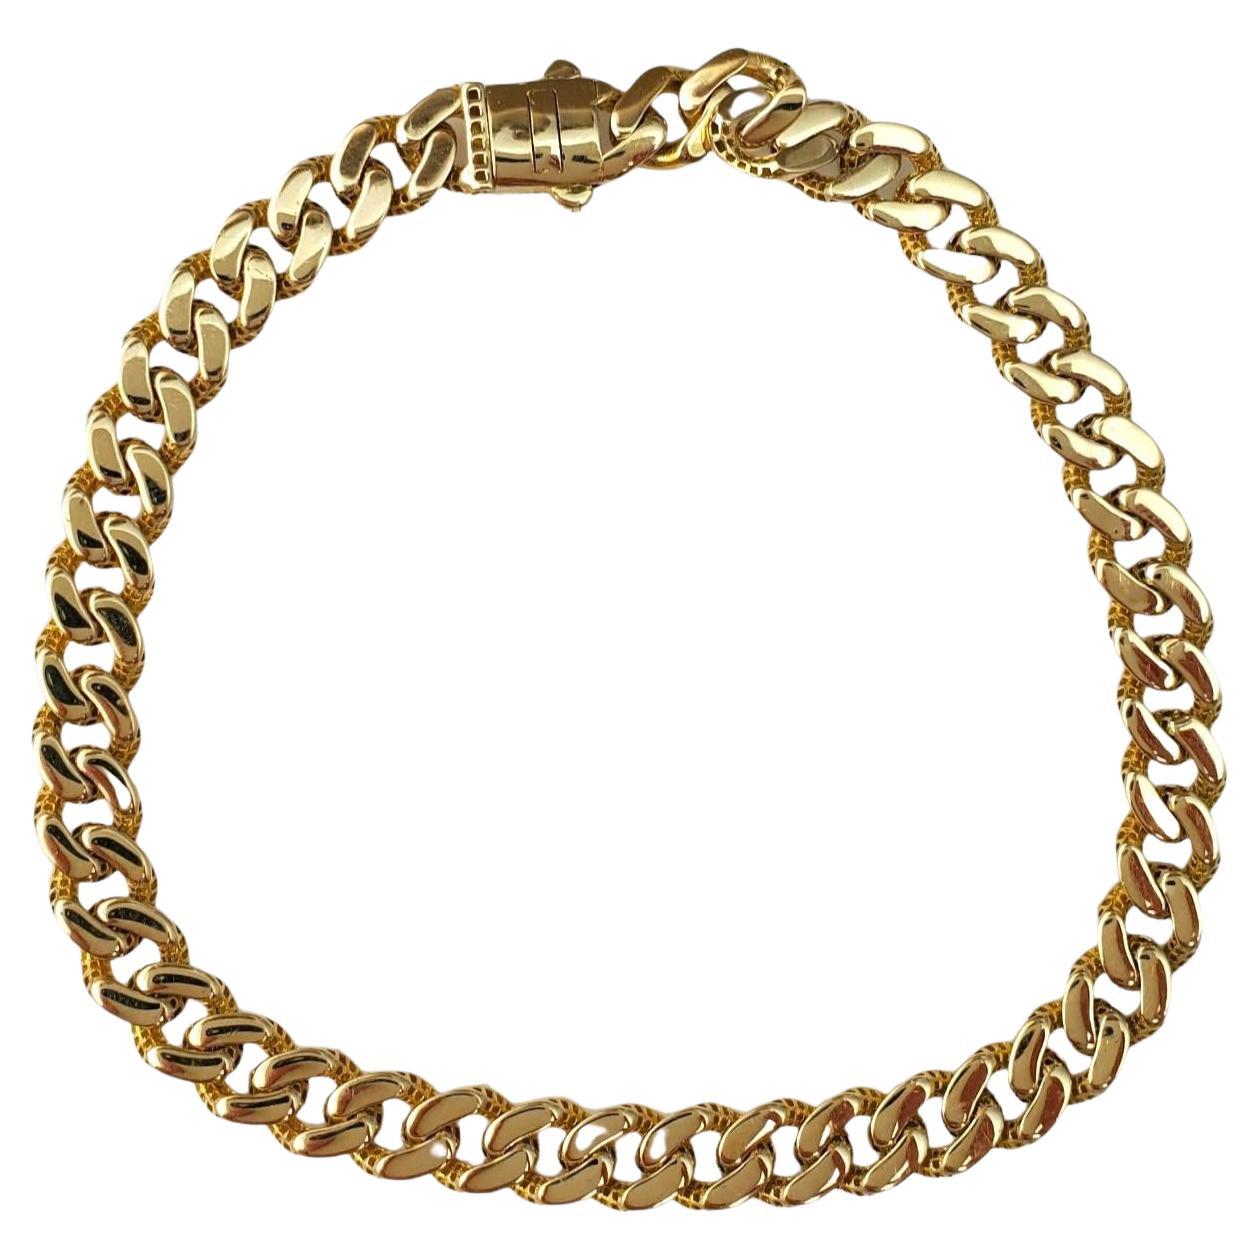 14K Yellow Gold Curb Link Chain Bracelet #17166